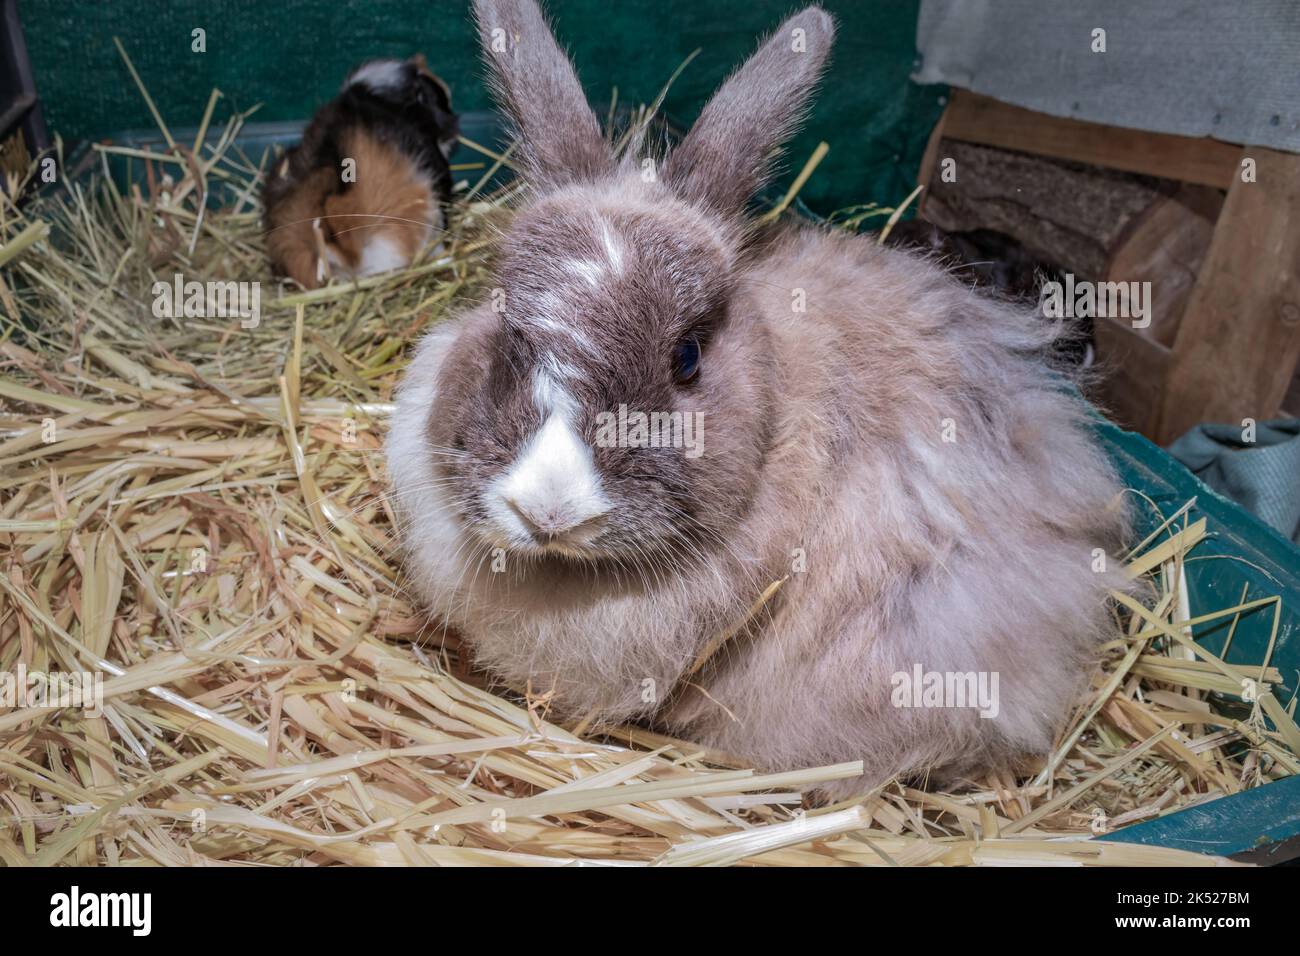 Cute domestic pet rabbit, Cape Town, South Africa Stock Photo